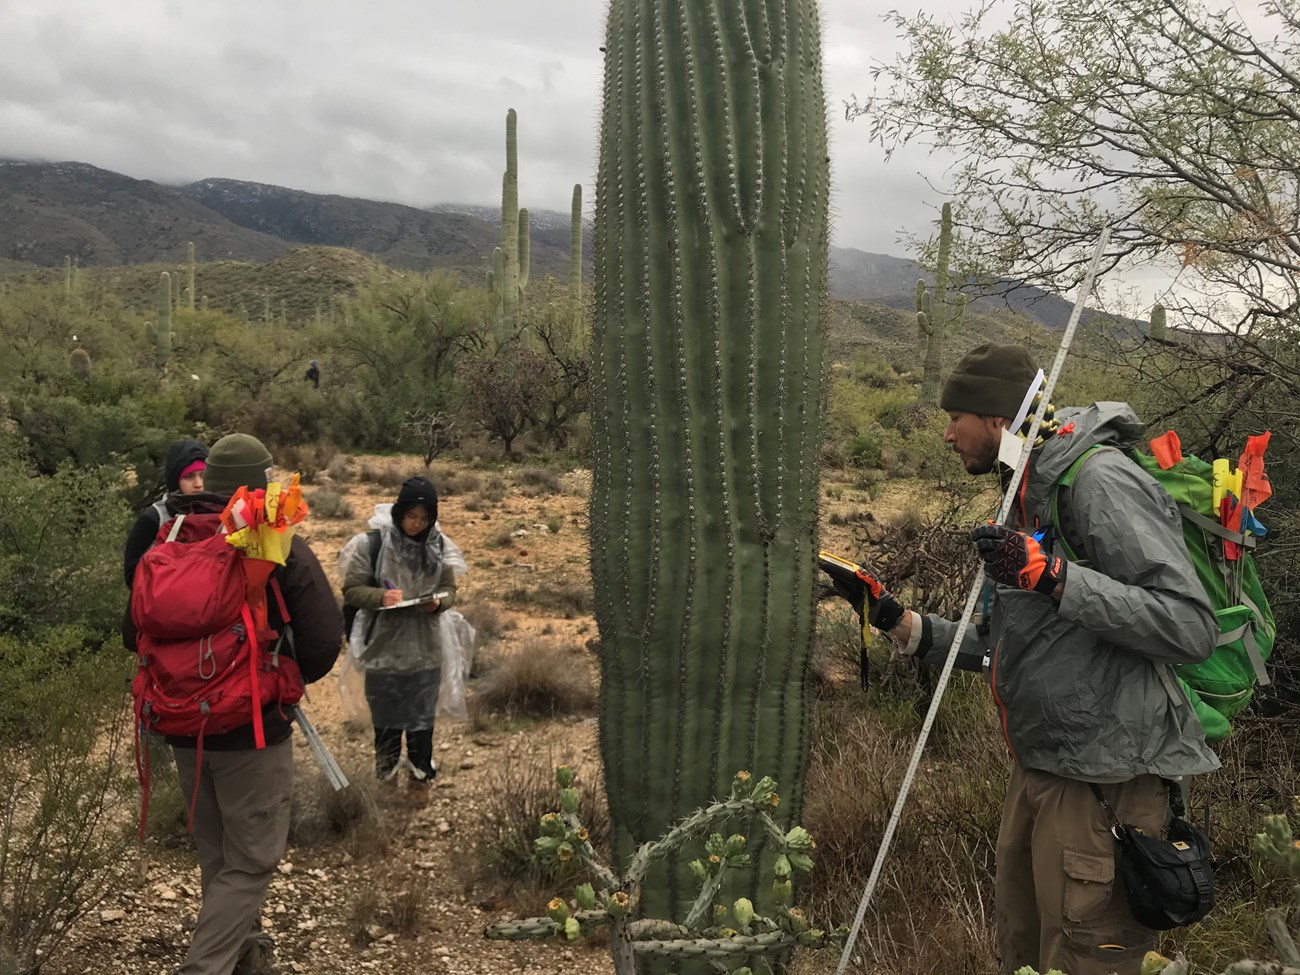 Park staffs and volunteer working together to find the coordinates of a saguaro